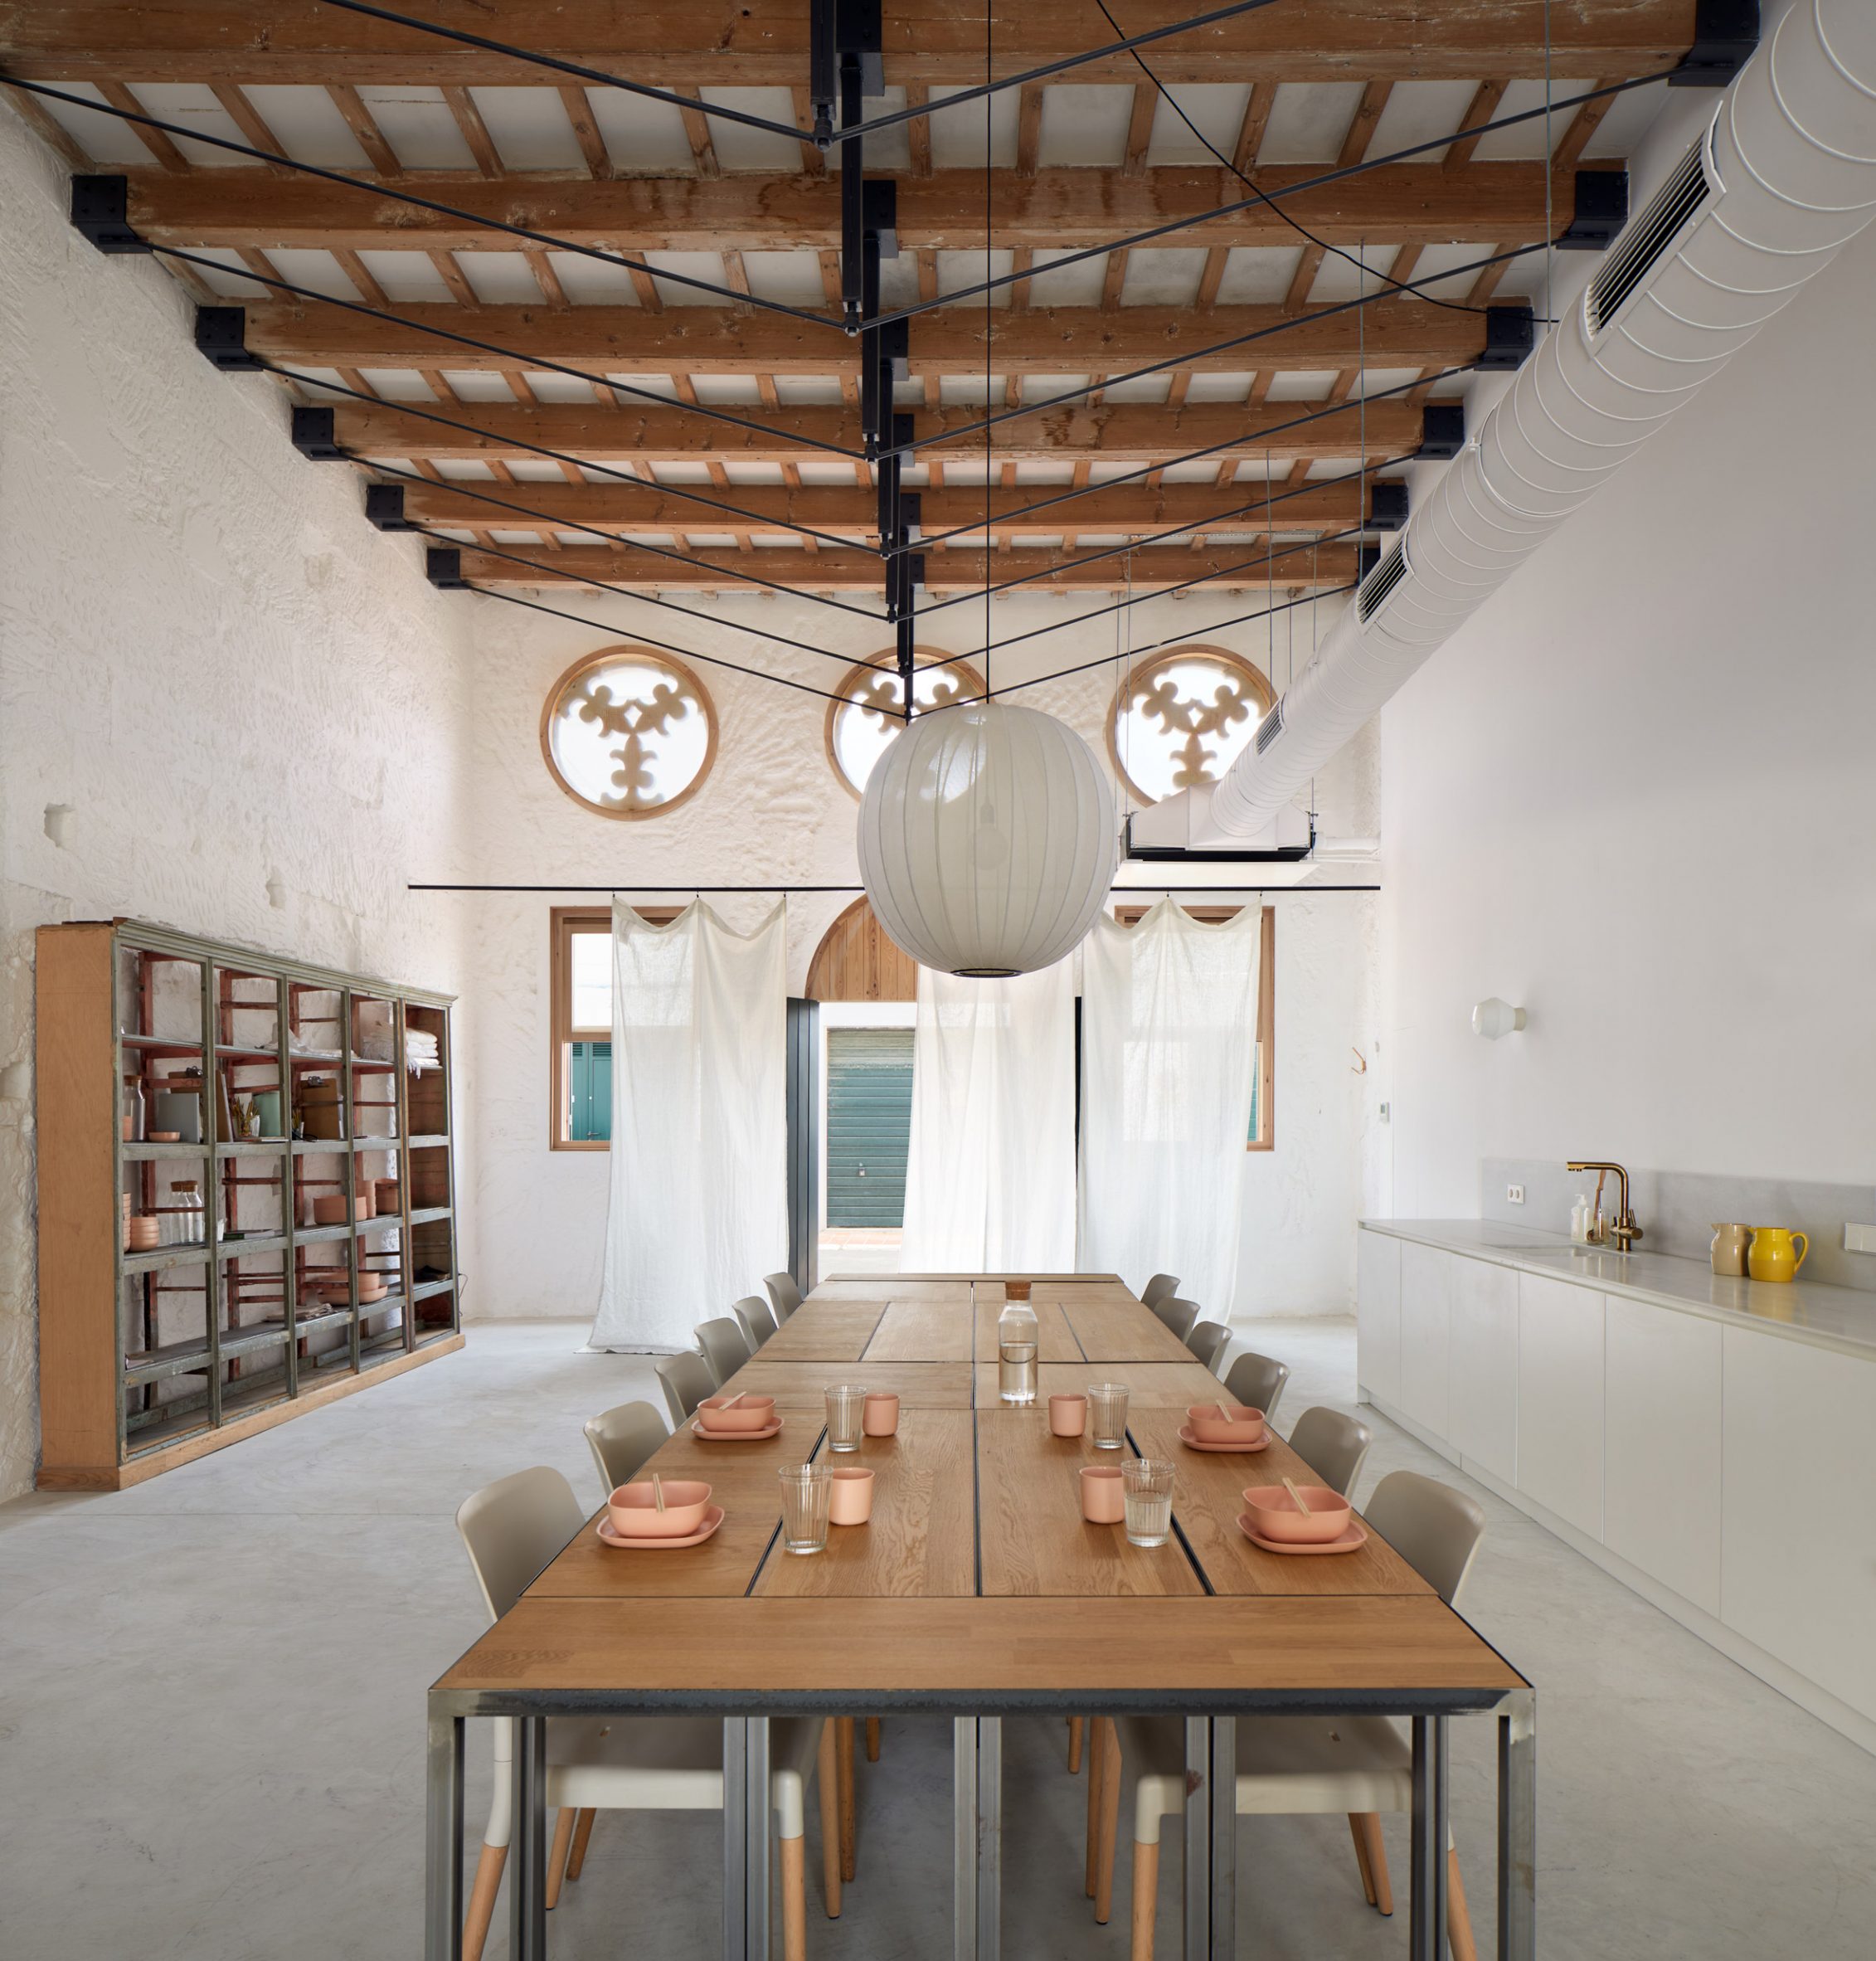 Dining area of creative retreat designed by Anna Truyol and Emma Martí with long wooden table